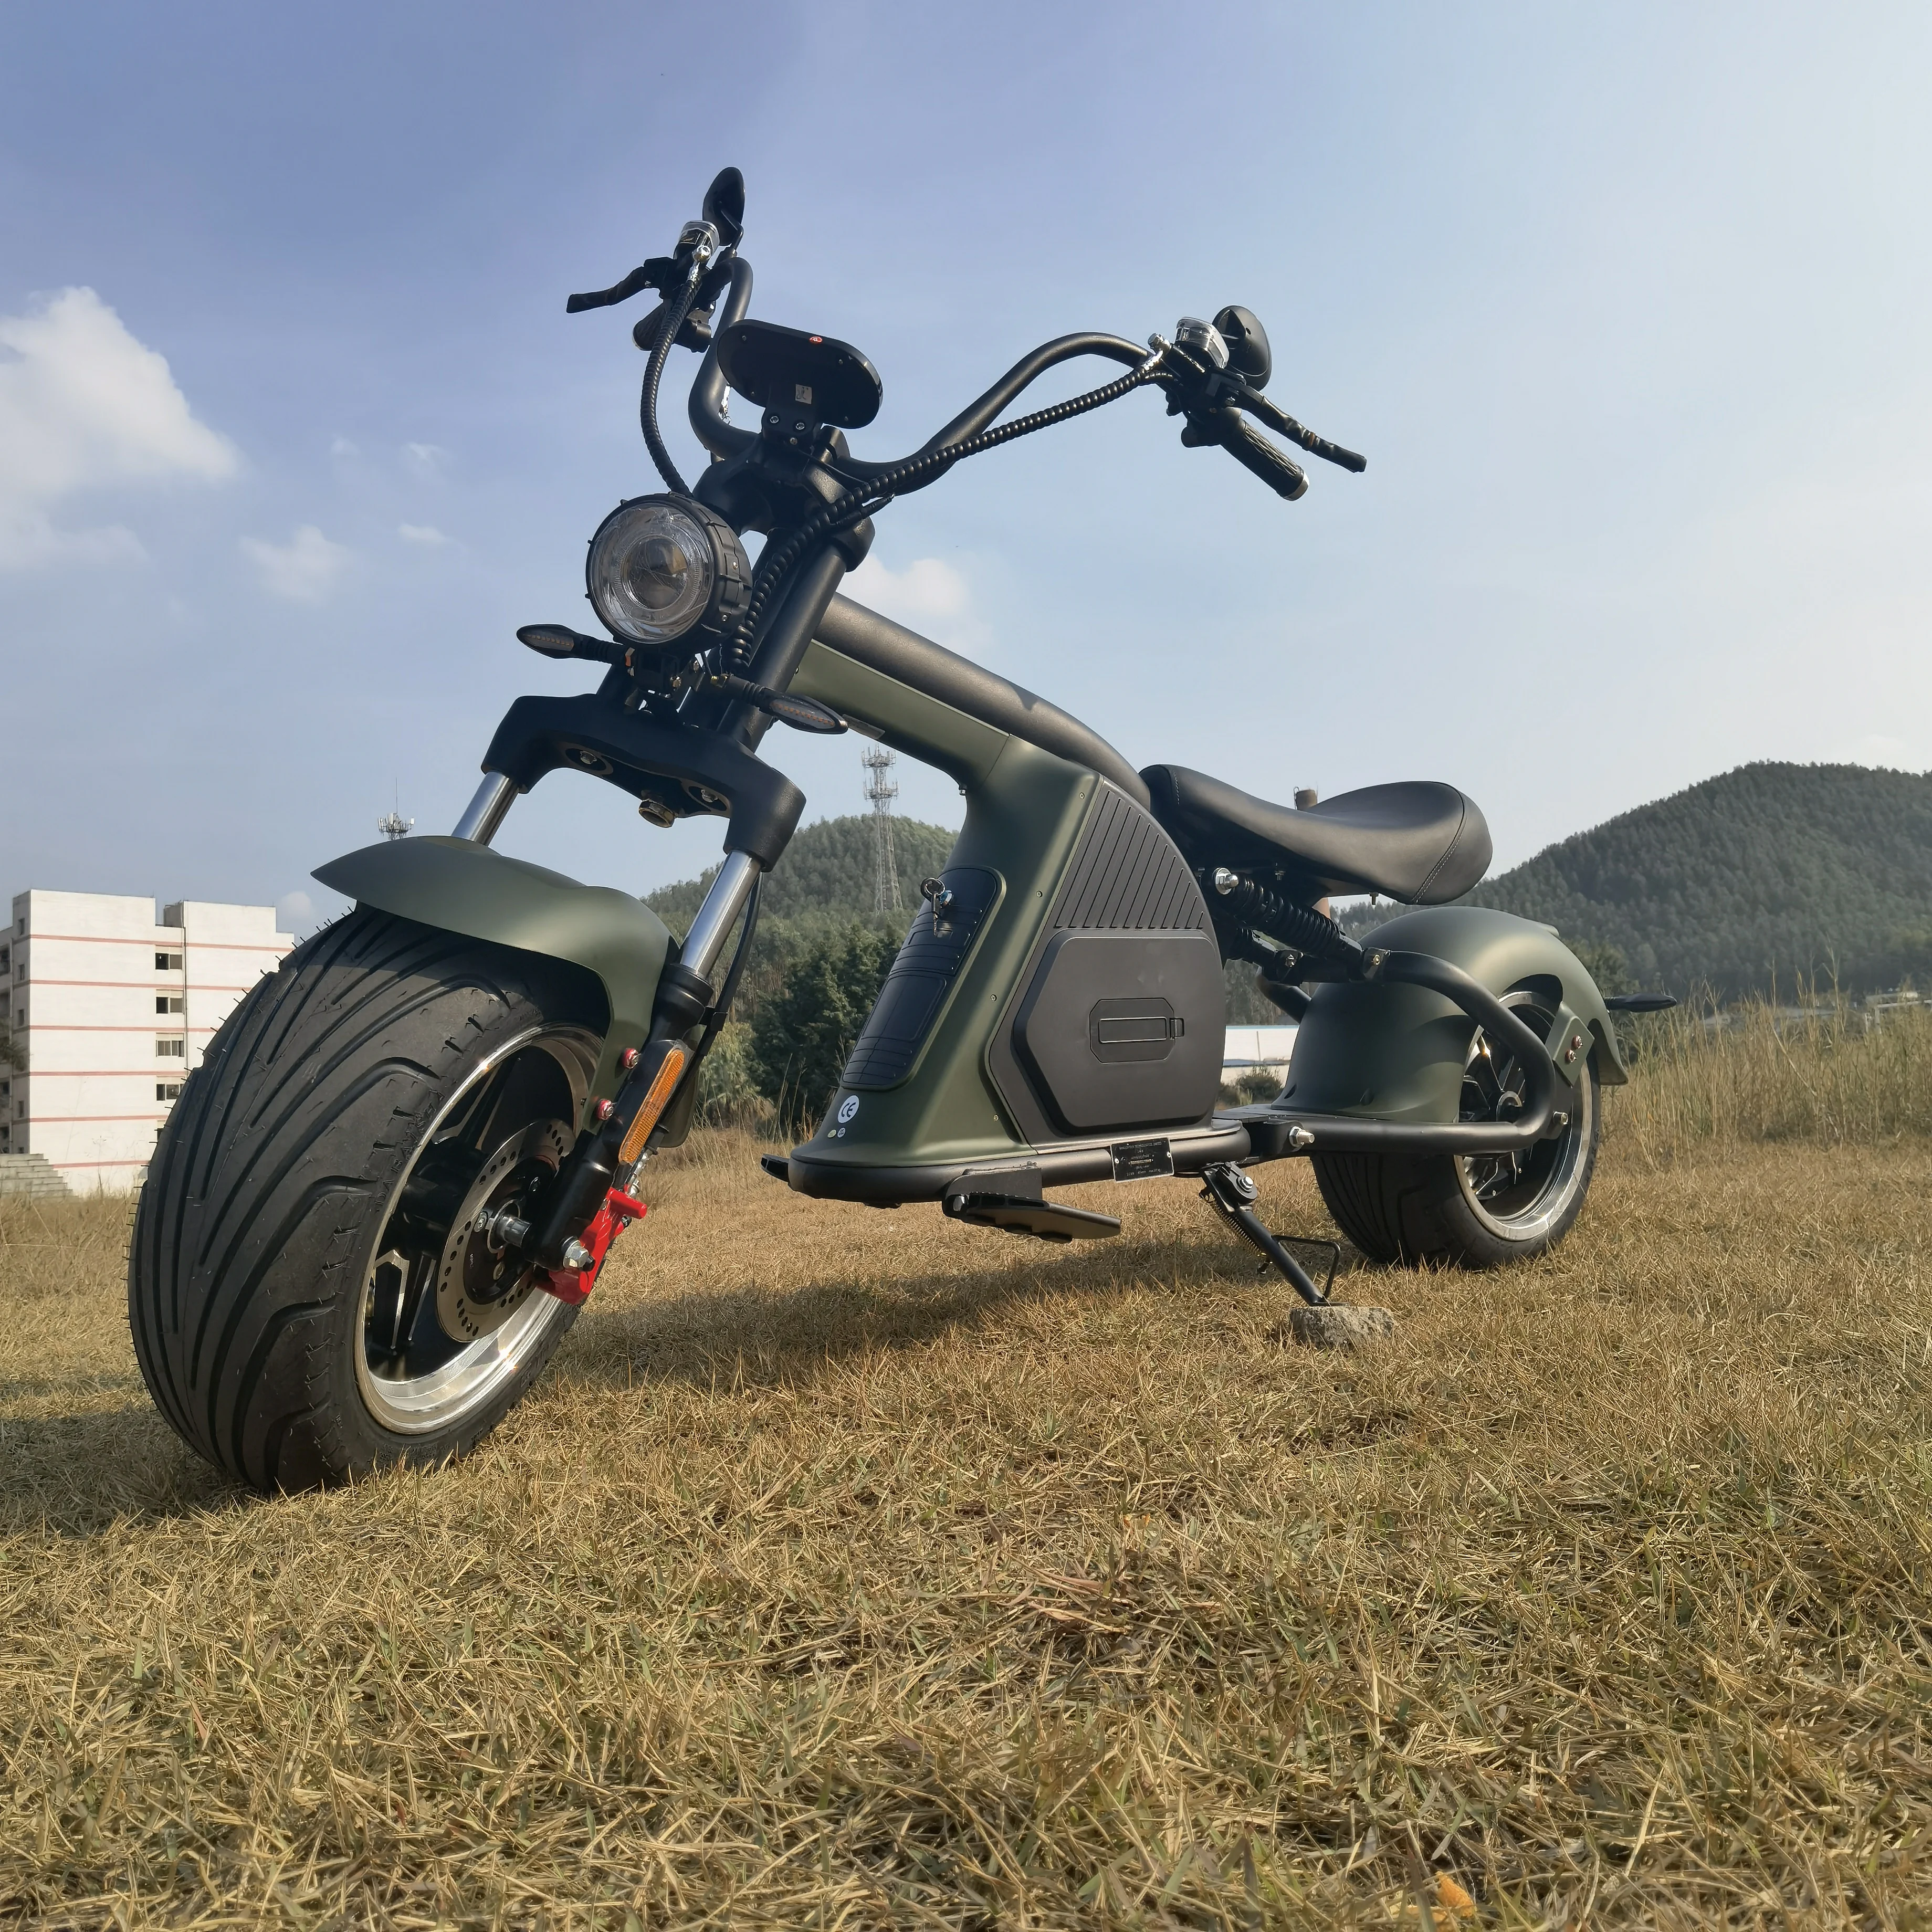 

Amoto eu warehouse stock M8 new model 2000w eec coc electric motorcycle scooter citycoco, Customized